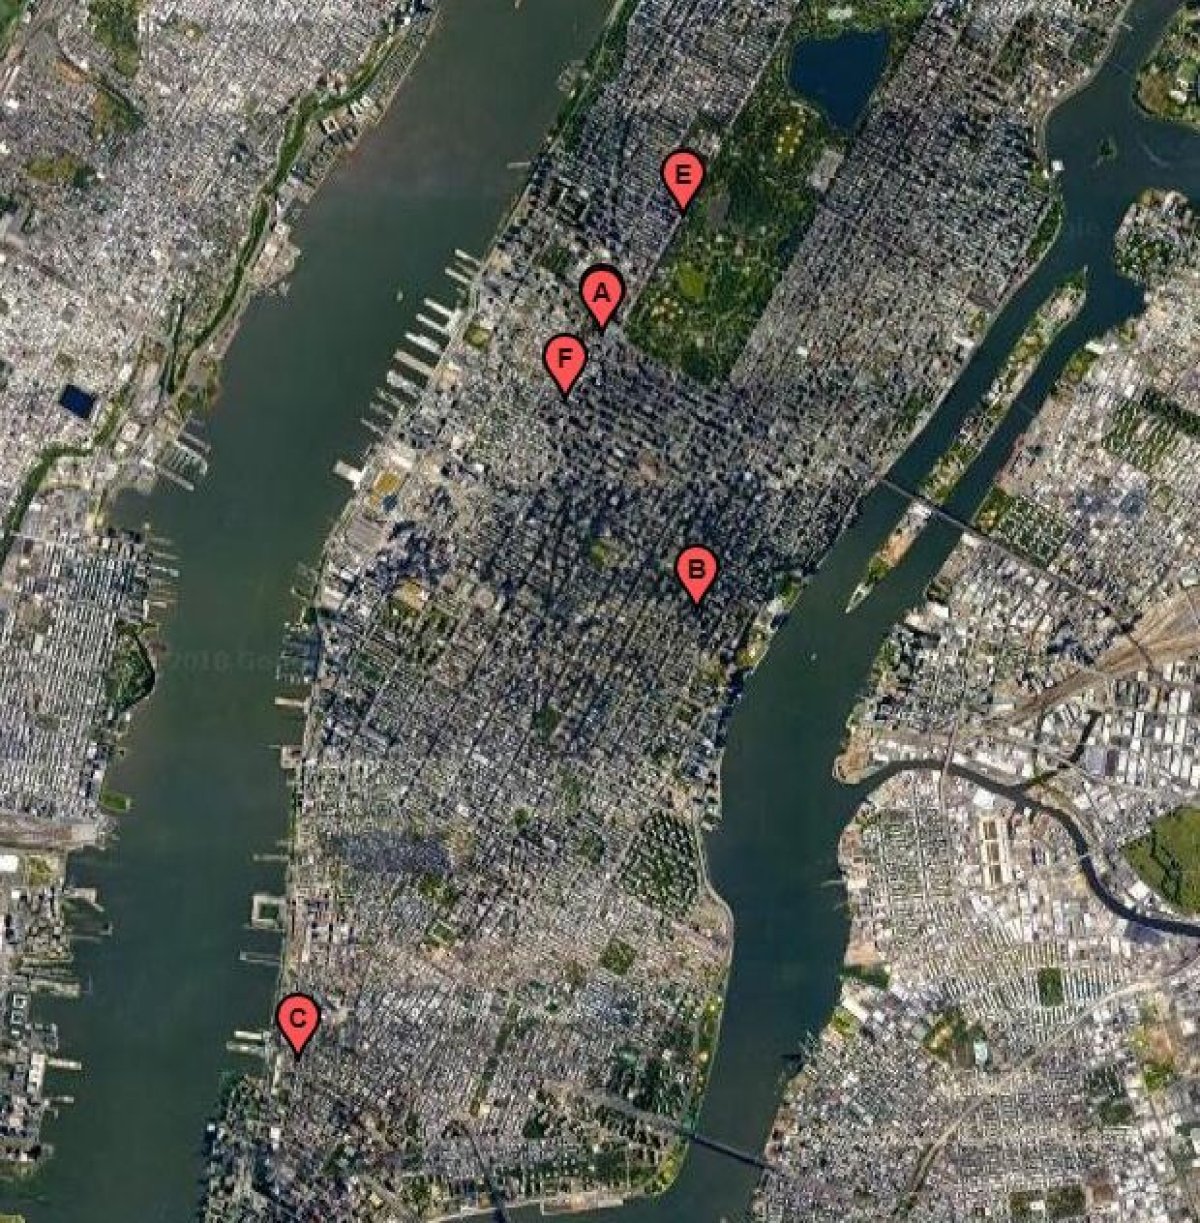 New York City Bomb Threat Map, Suspicious Packages